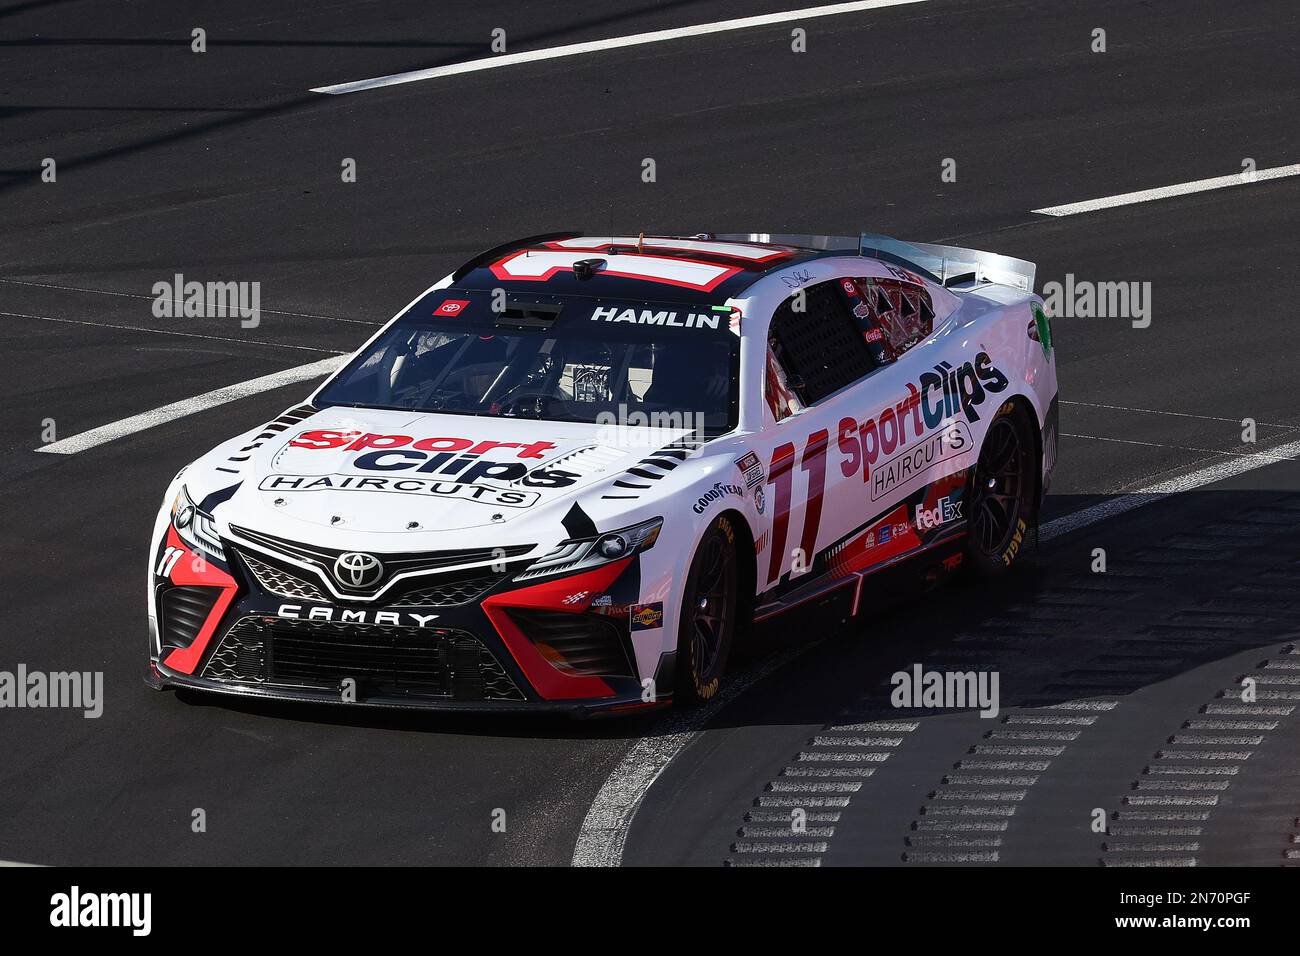 NASCAR Cup Series driver Denny Hamlin (11) races during the Busch Light Clash at the Los Angeles Coliseum, Sunday, Feb